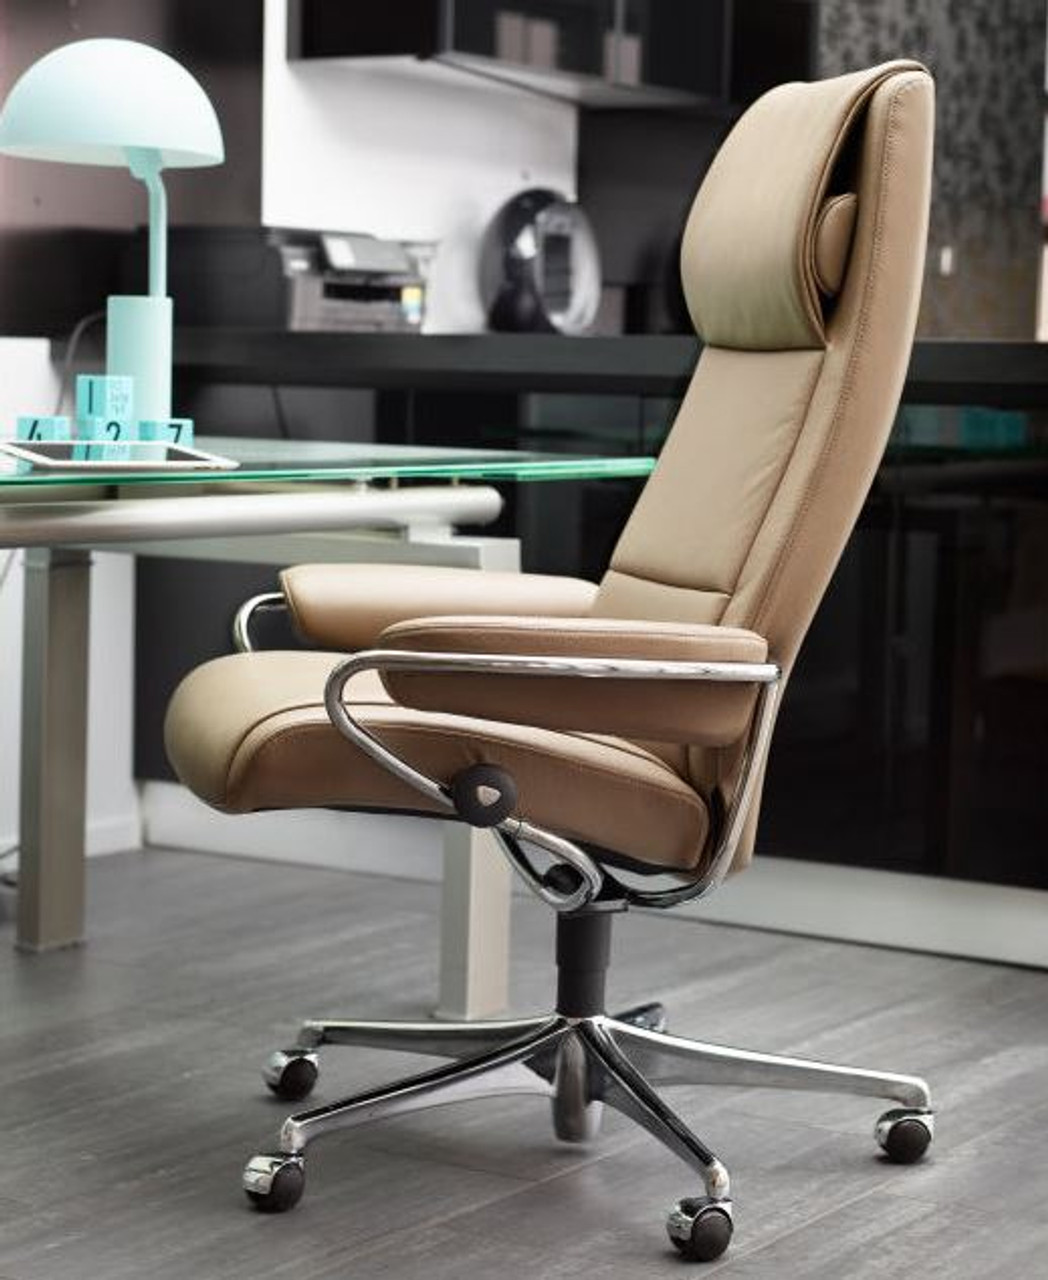 Be More Productive In A Stressless Office Chair.  86907.1475198903.JPG?c=2&imbypass=on